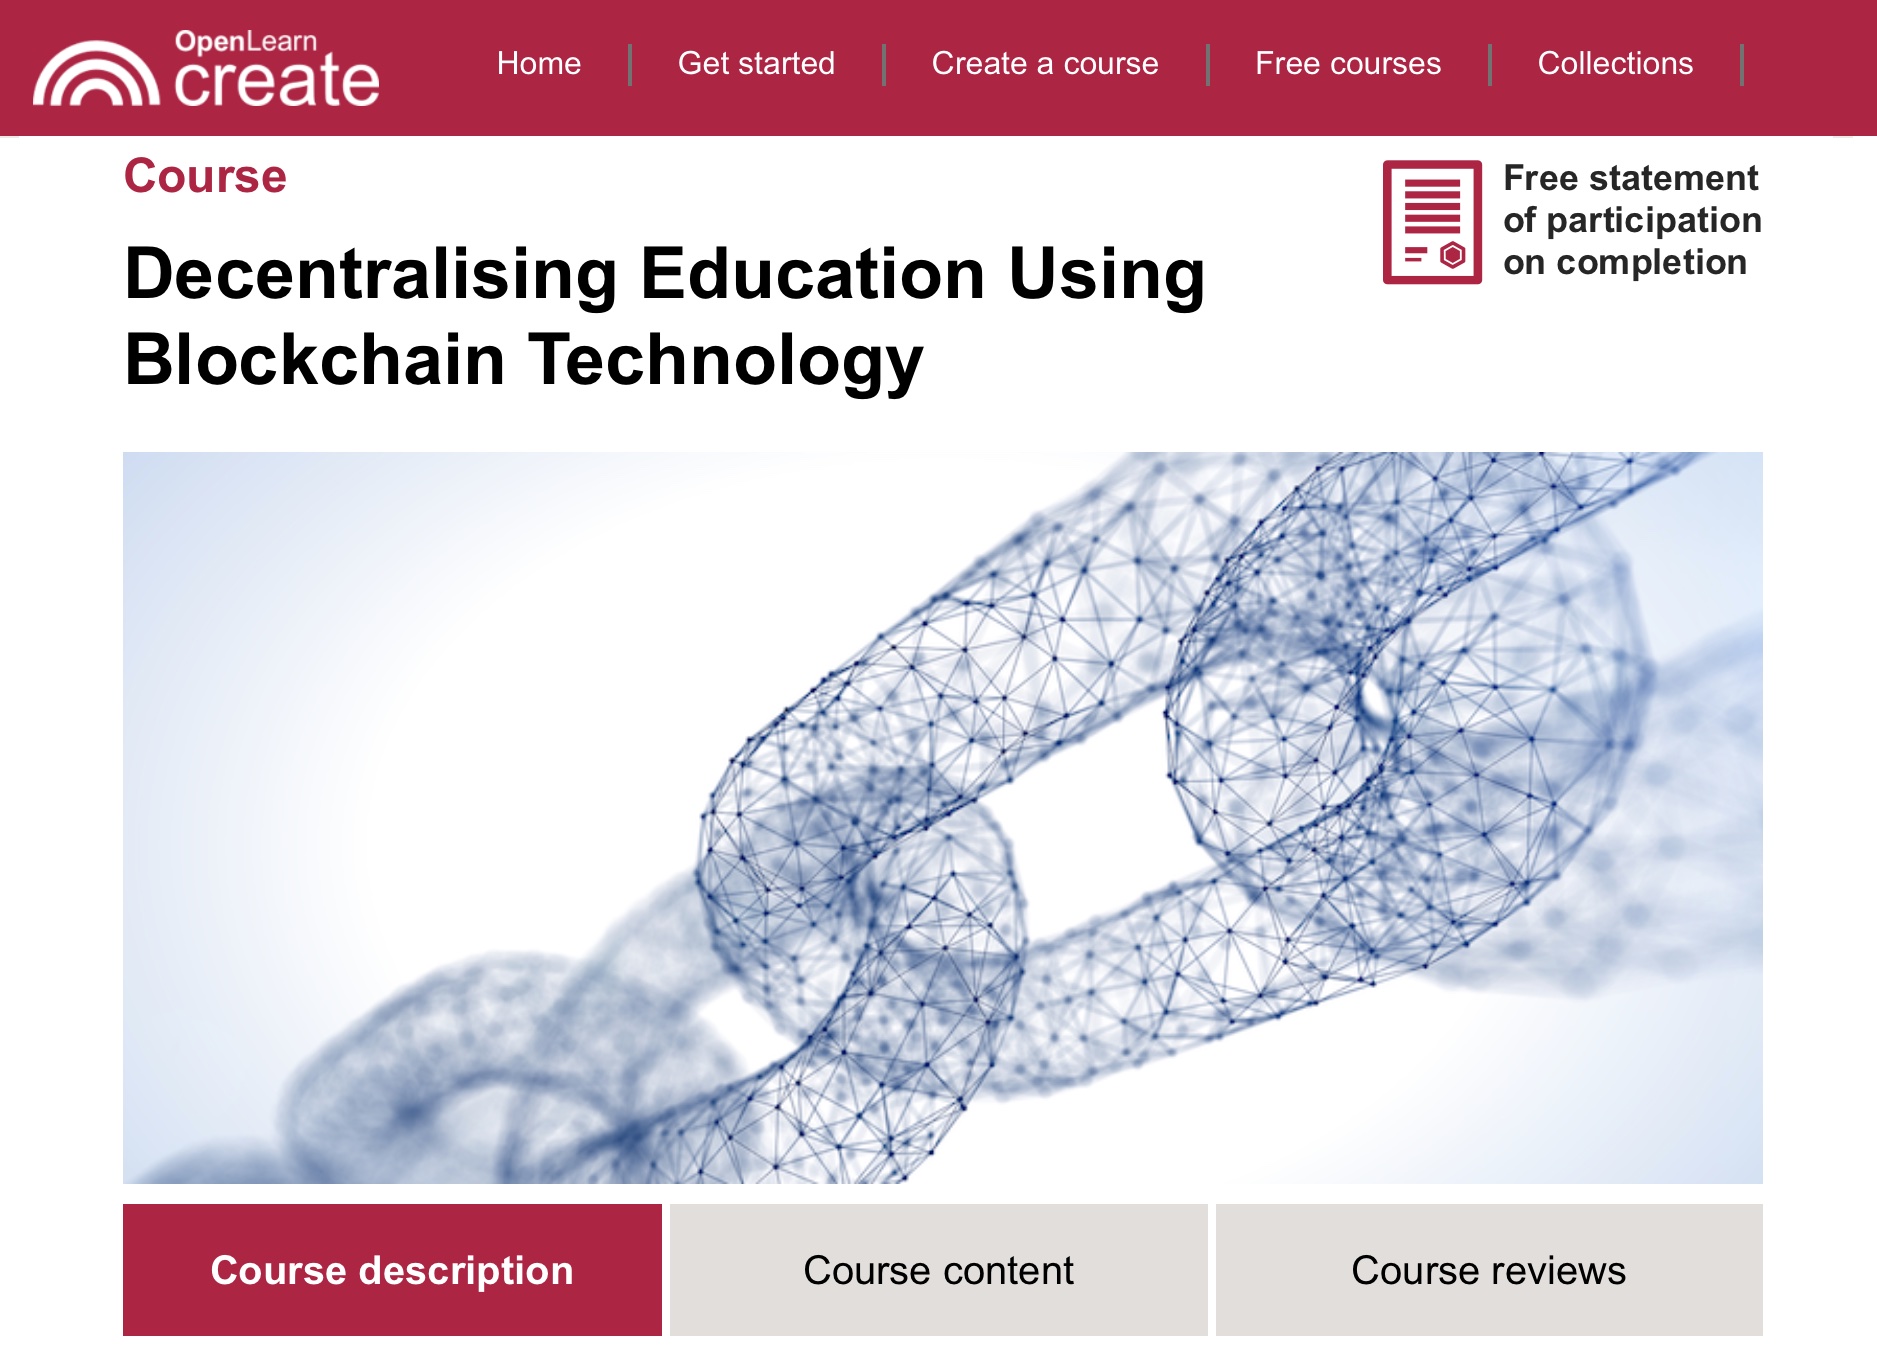 New Badged Open Course: Decentralising Education Using Blockchain Technology